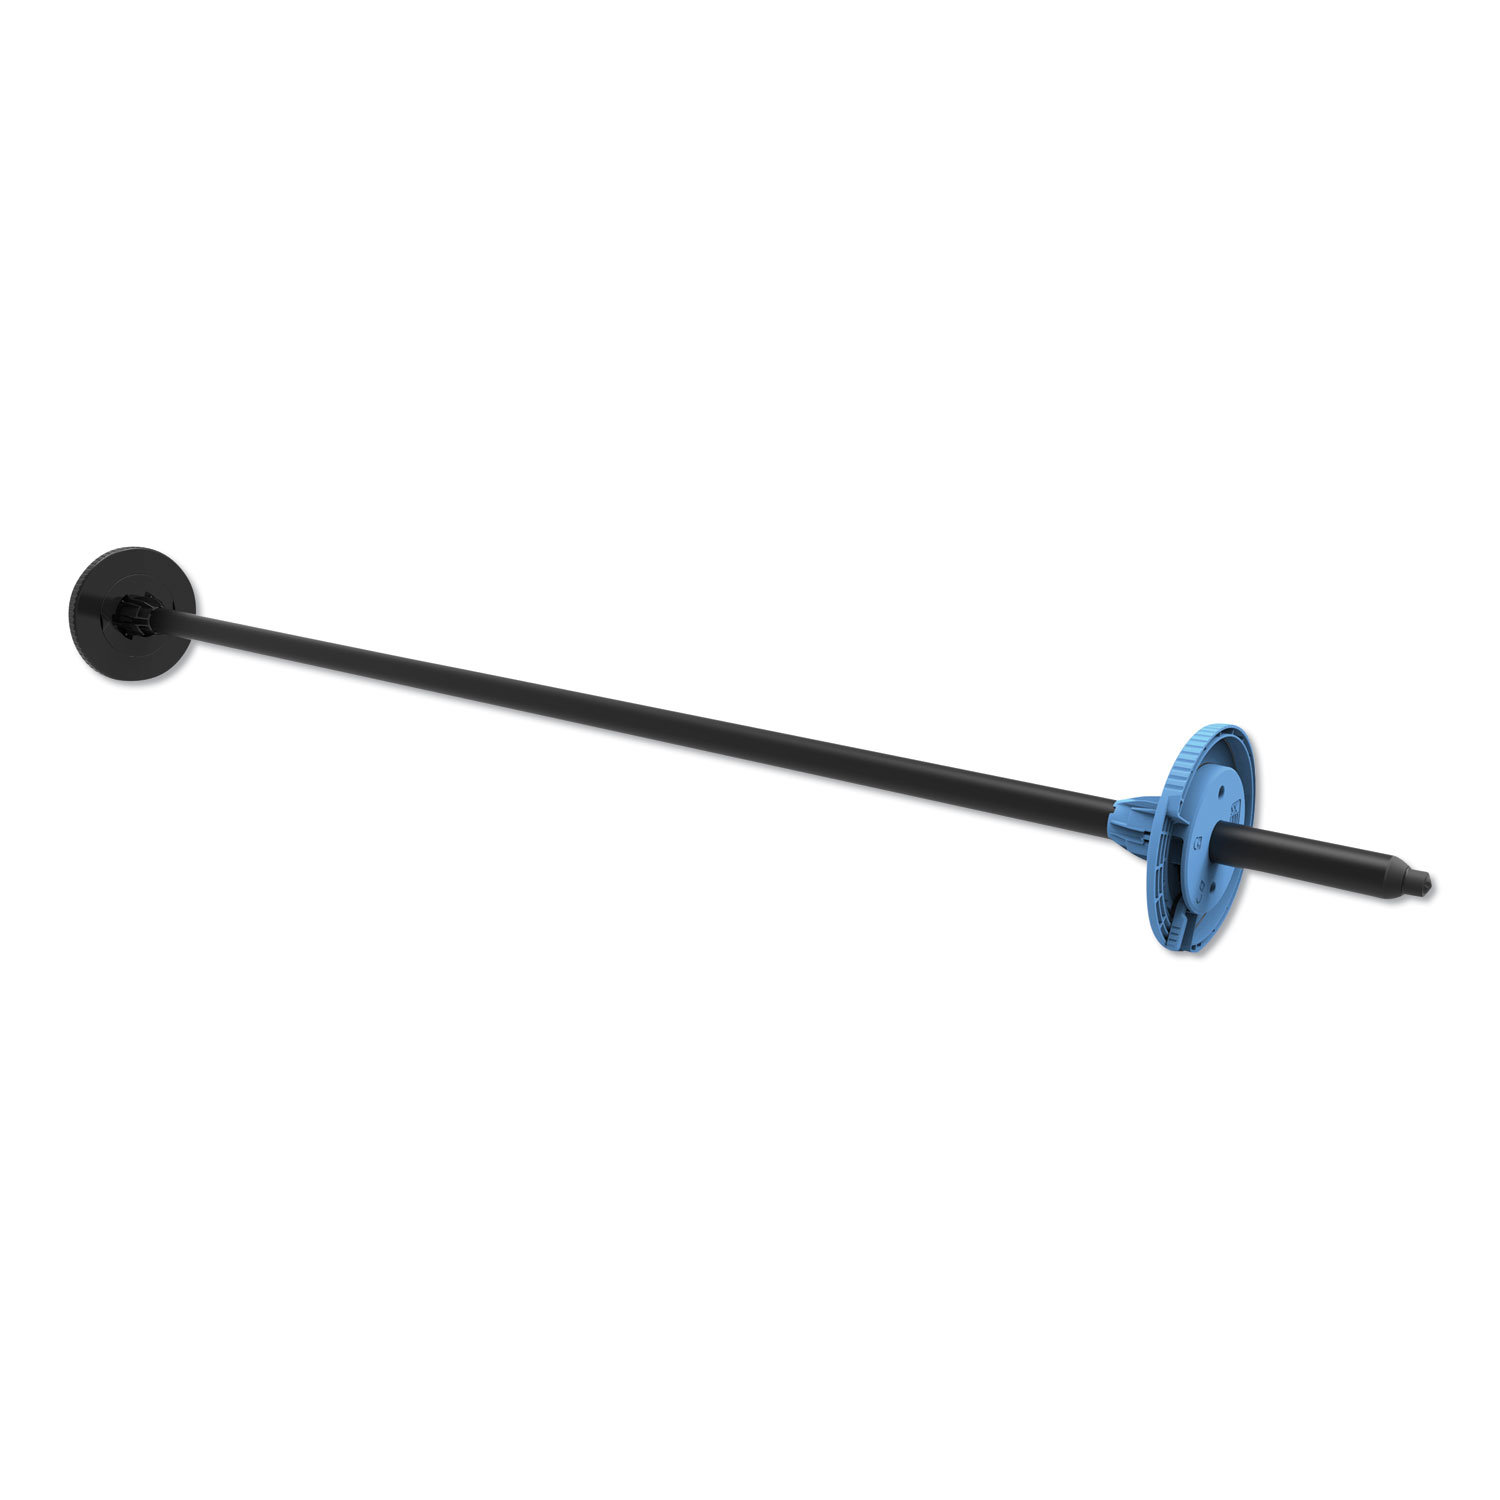  HP CQ753A Spindle for Designjet Z6200 42-Inch Printer (HEWCQ753A) 